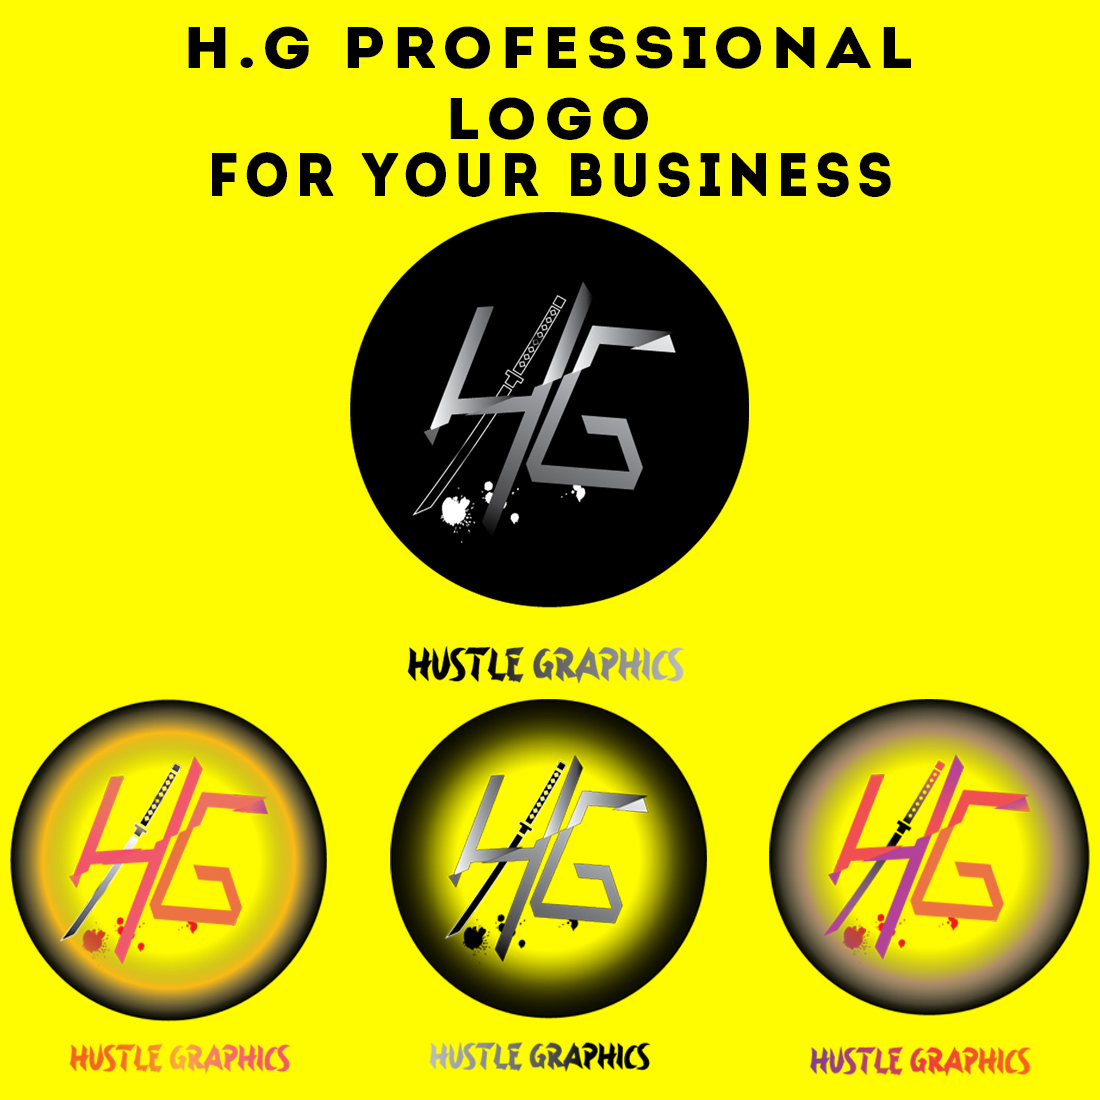 H.G Letter professional Business logo previews.